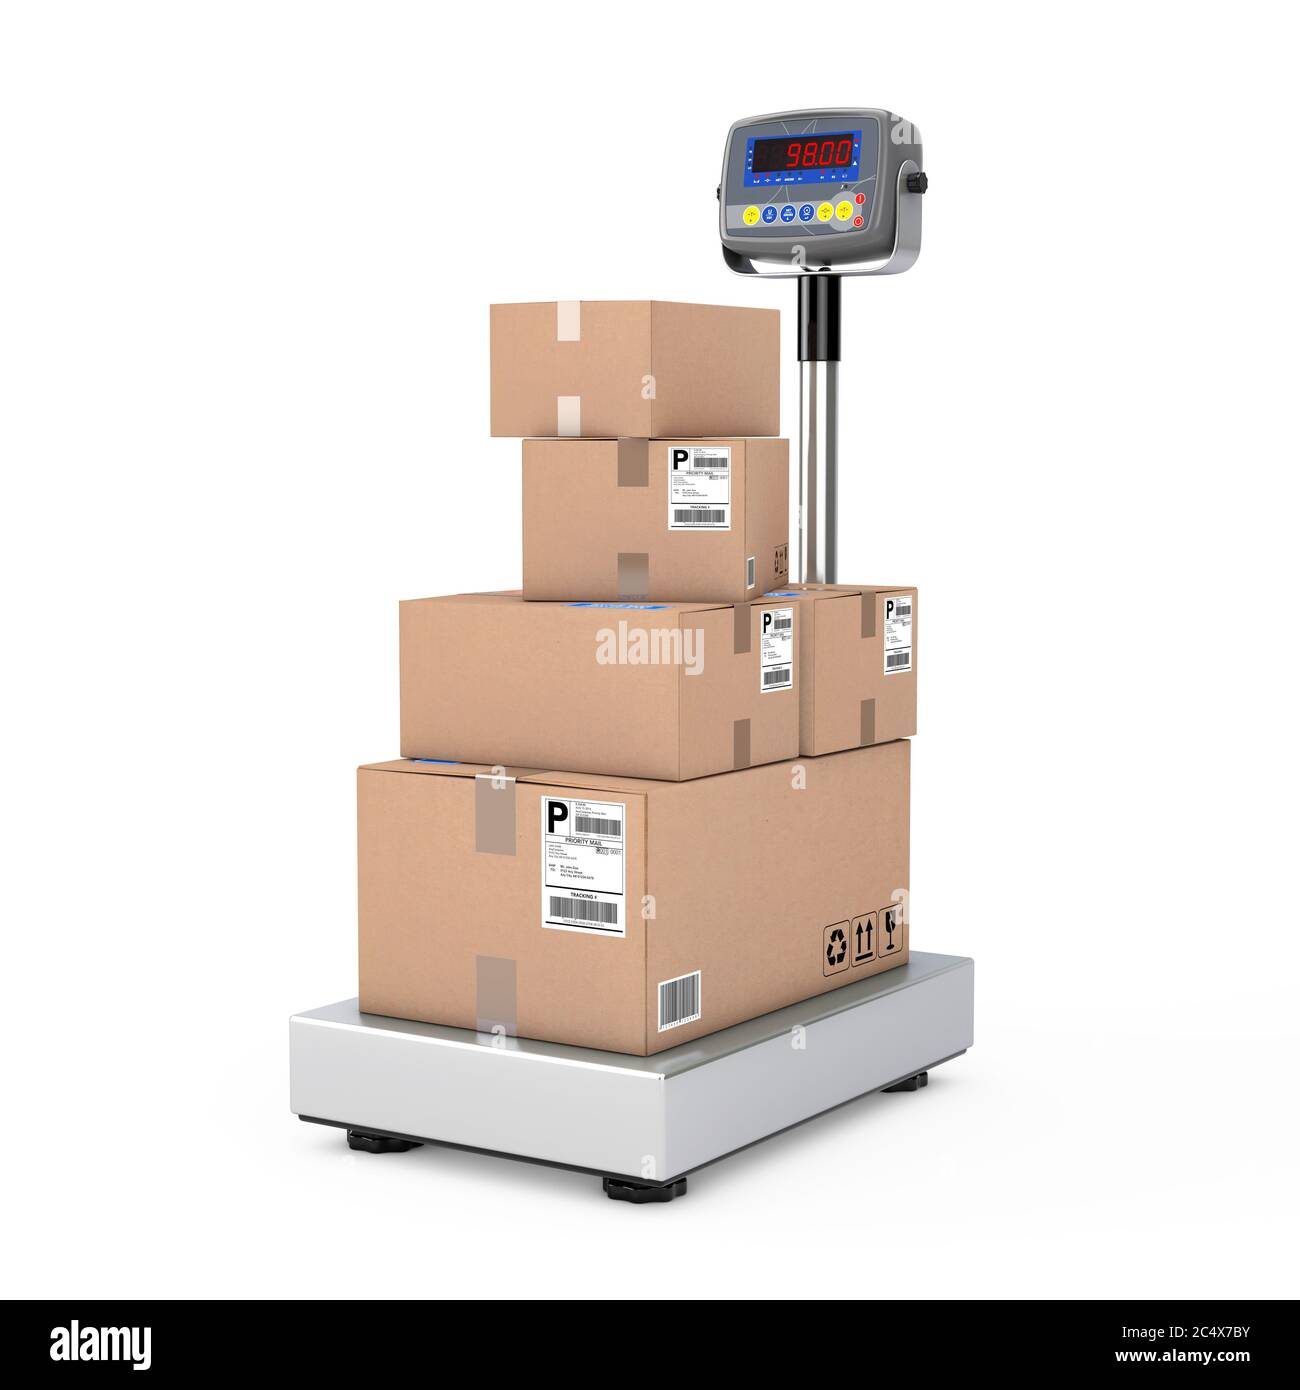 https://c8.alamy.com/comp/2C4X7BY/stacked-cardboard-boxes-parcels-over-warehouse-digital-cargo-scales-on-a-white-background-3d-rendering-2C4X7BY.jpg